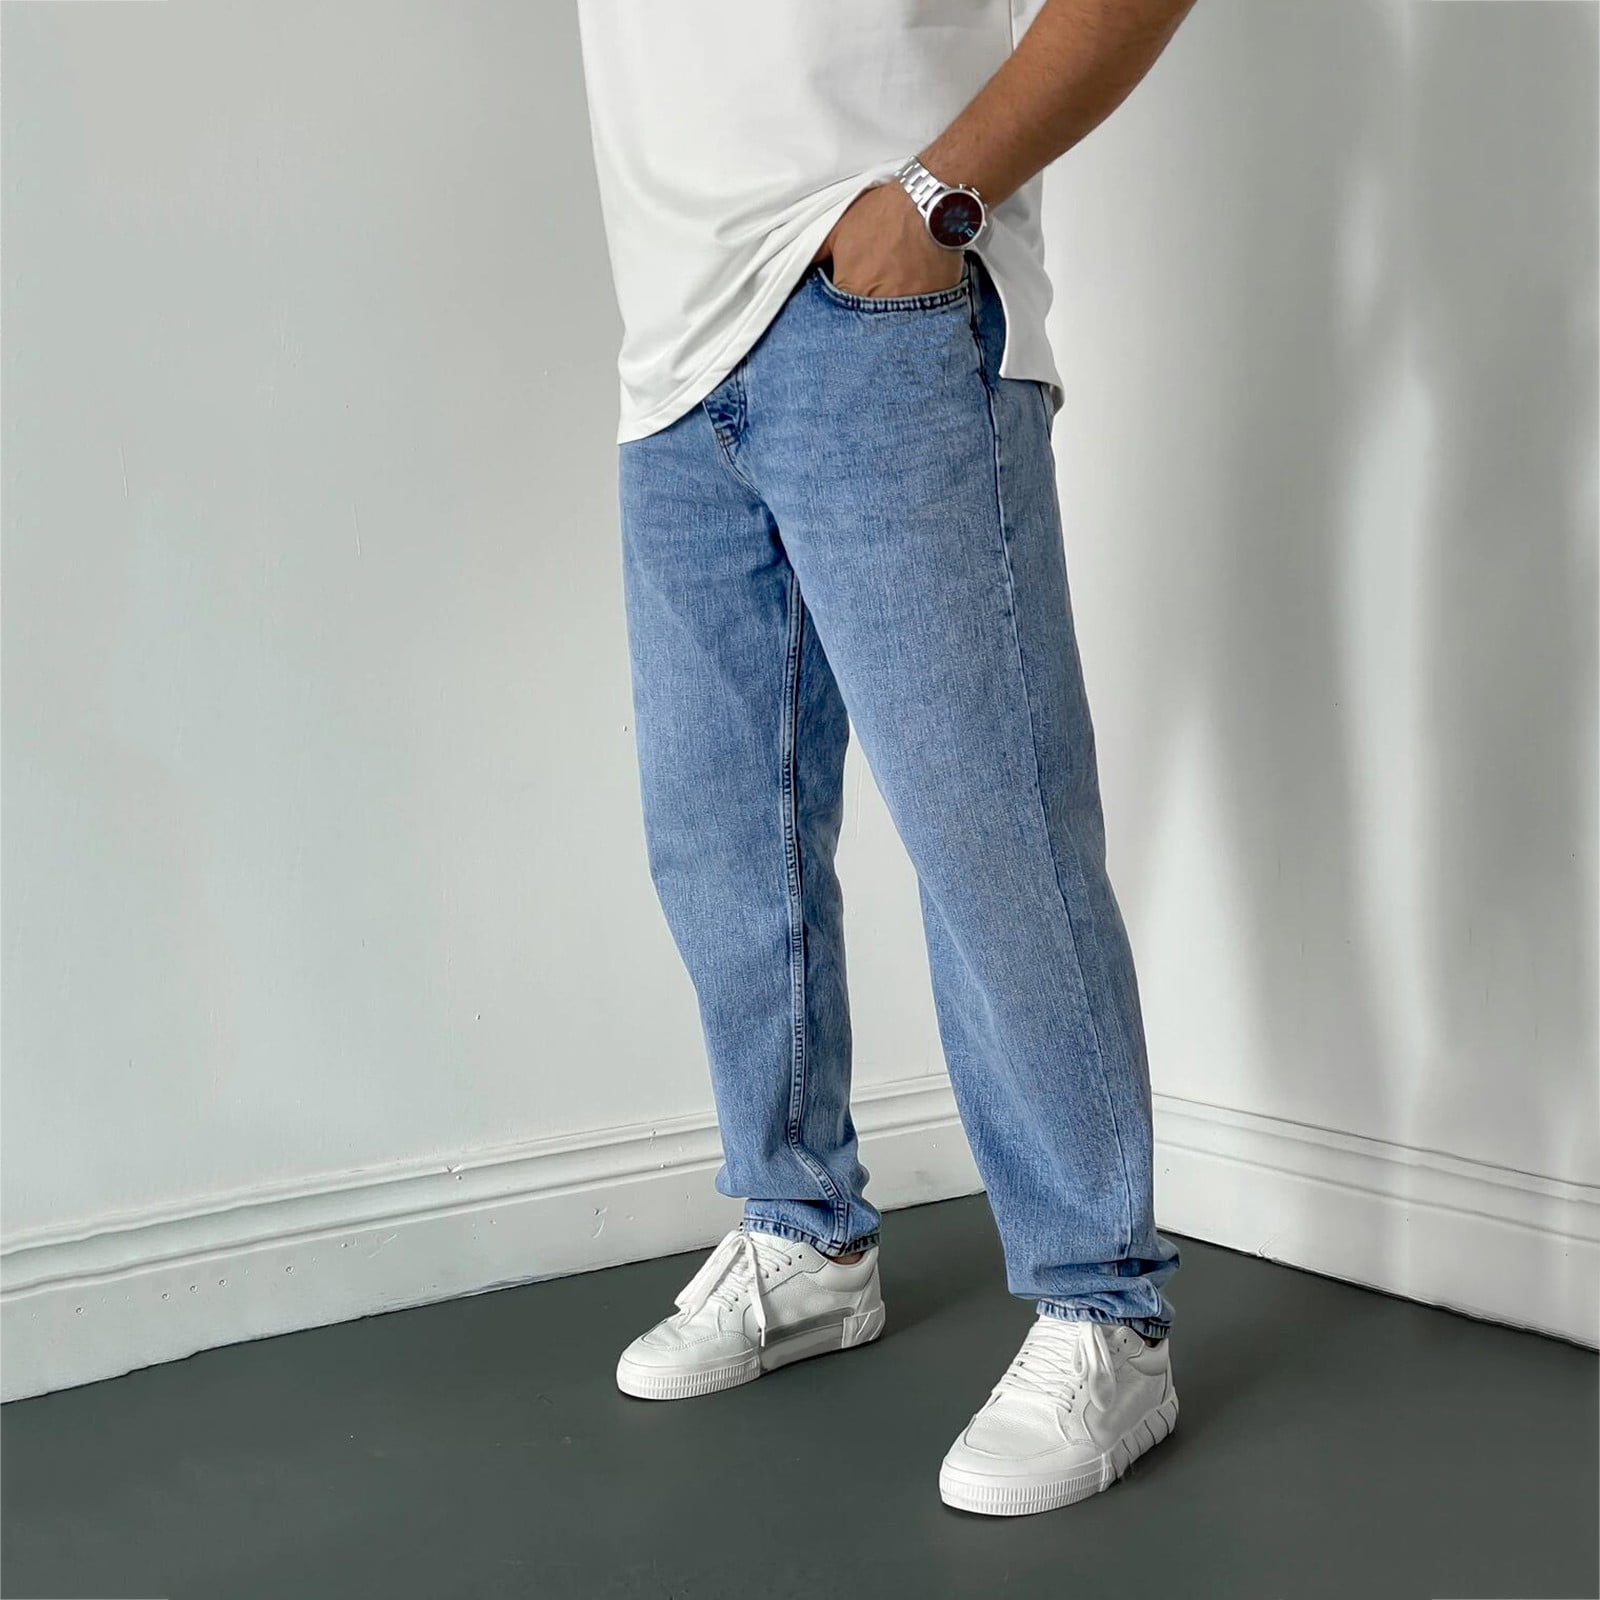 Light blue Men's Fashion Casual Solid Denim Straight Pants Zipper Fly  Pocket Jeans Trousers 